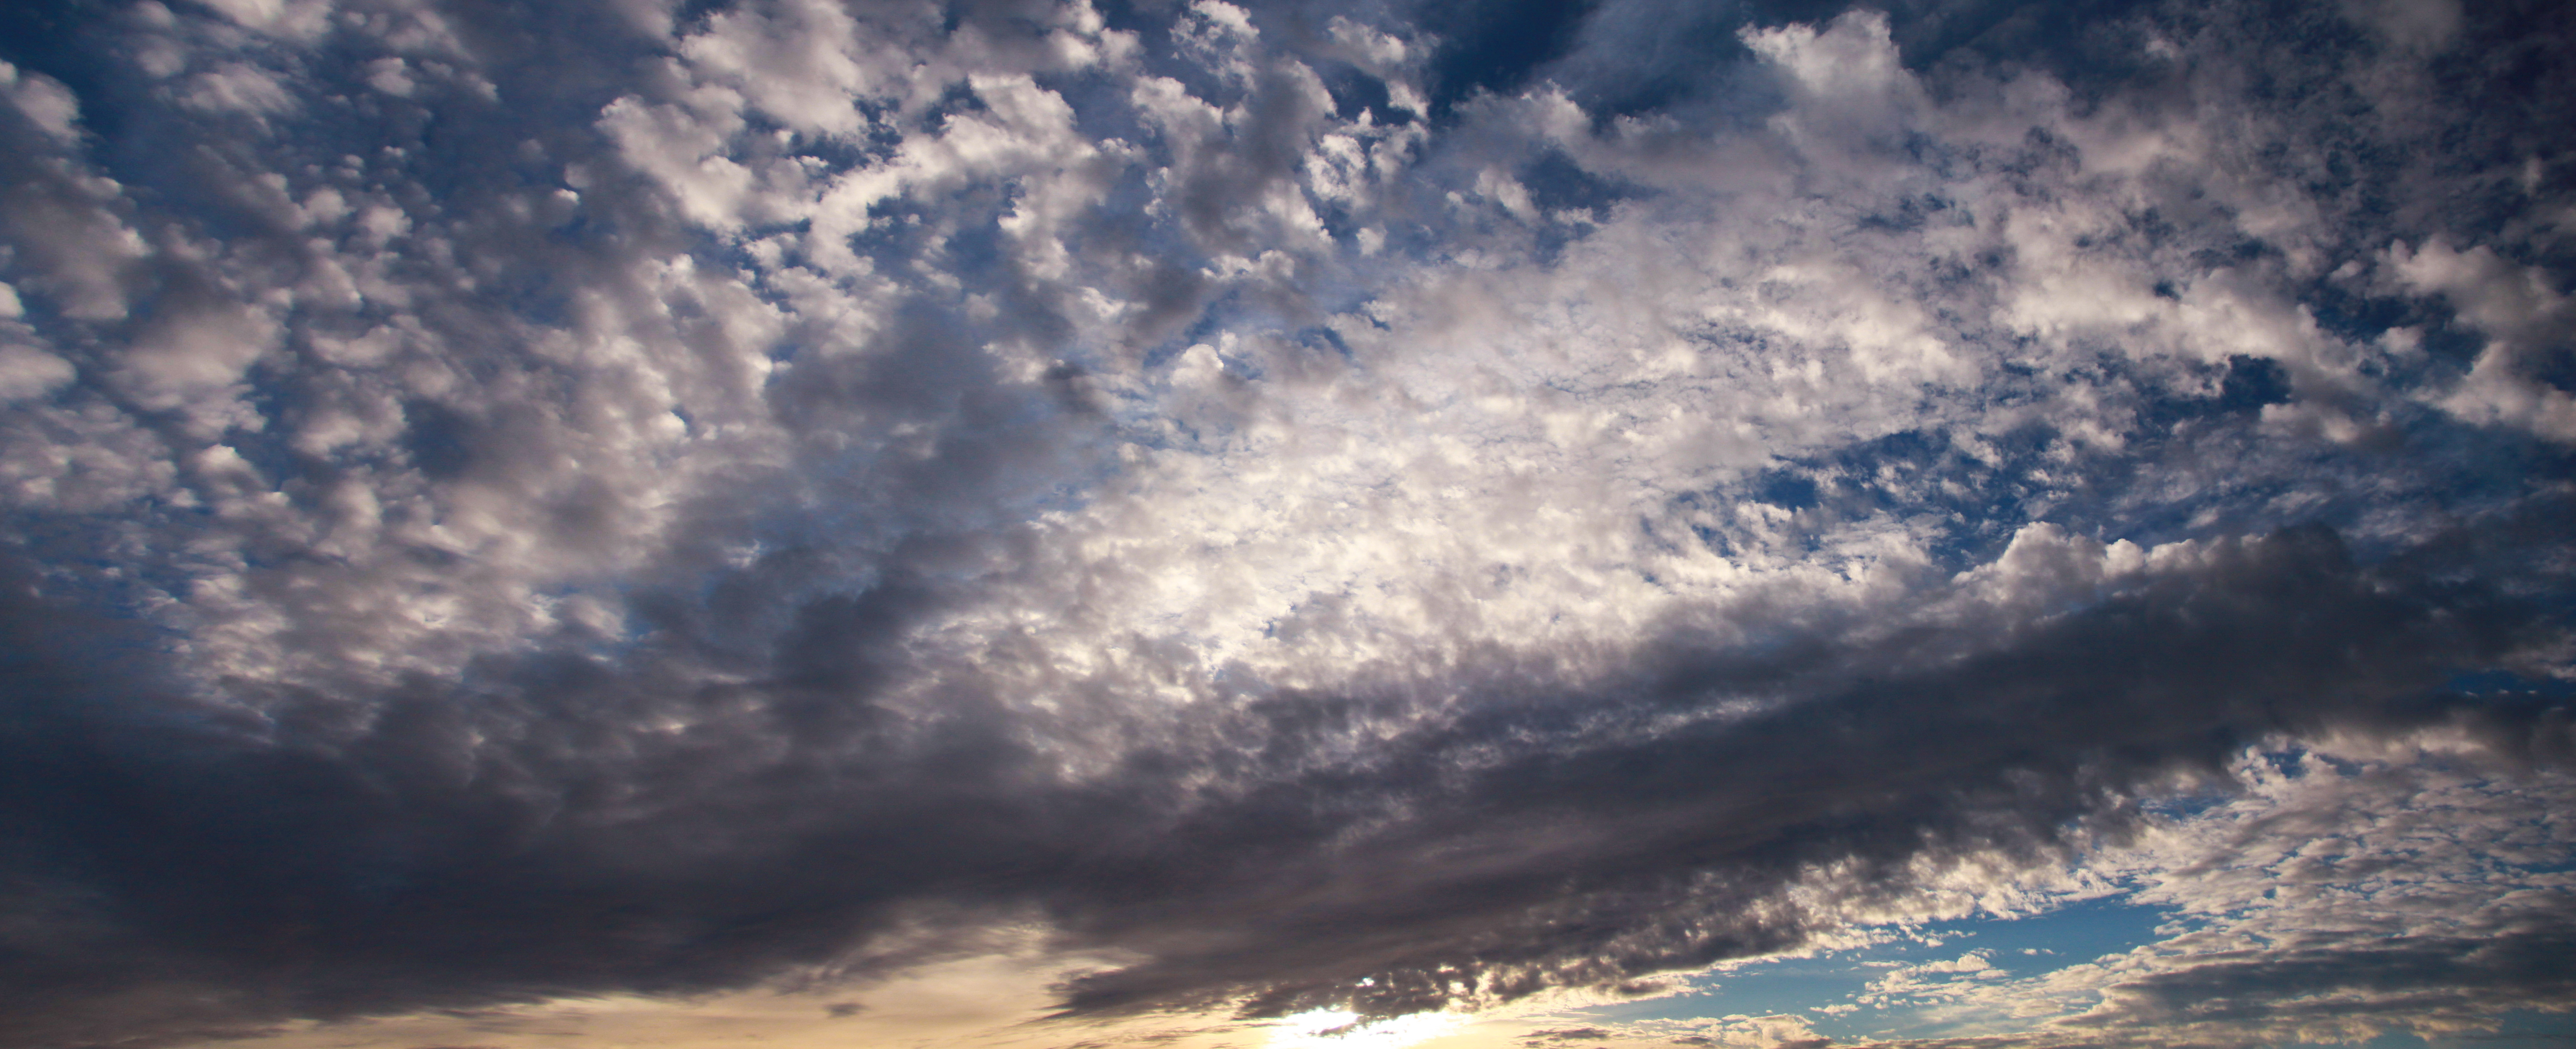 Sky Texture High Resolution Skybox Detailed Clouds Blue Cloudy